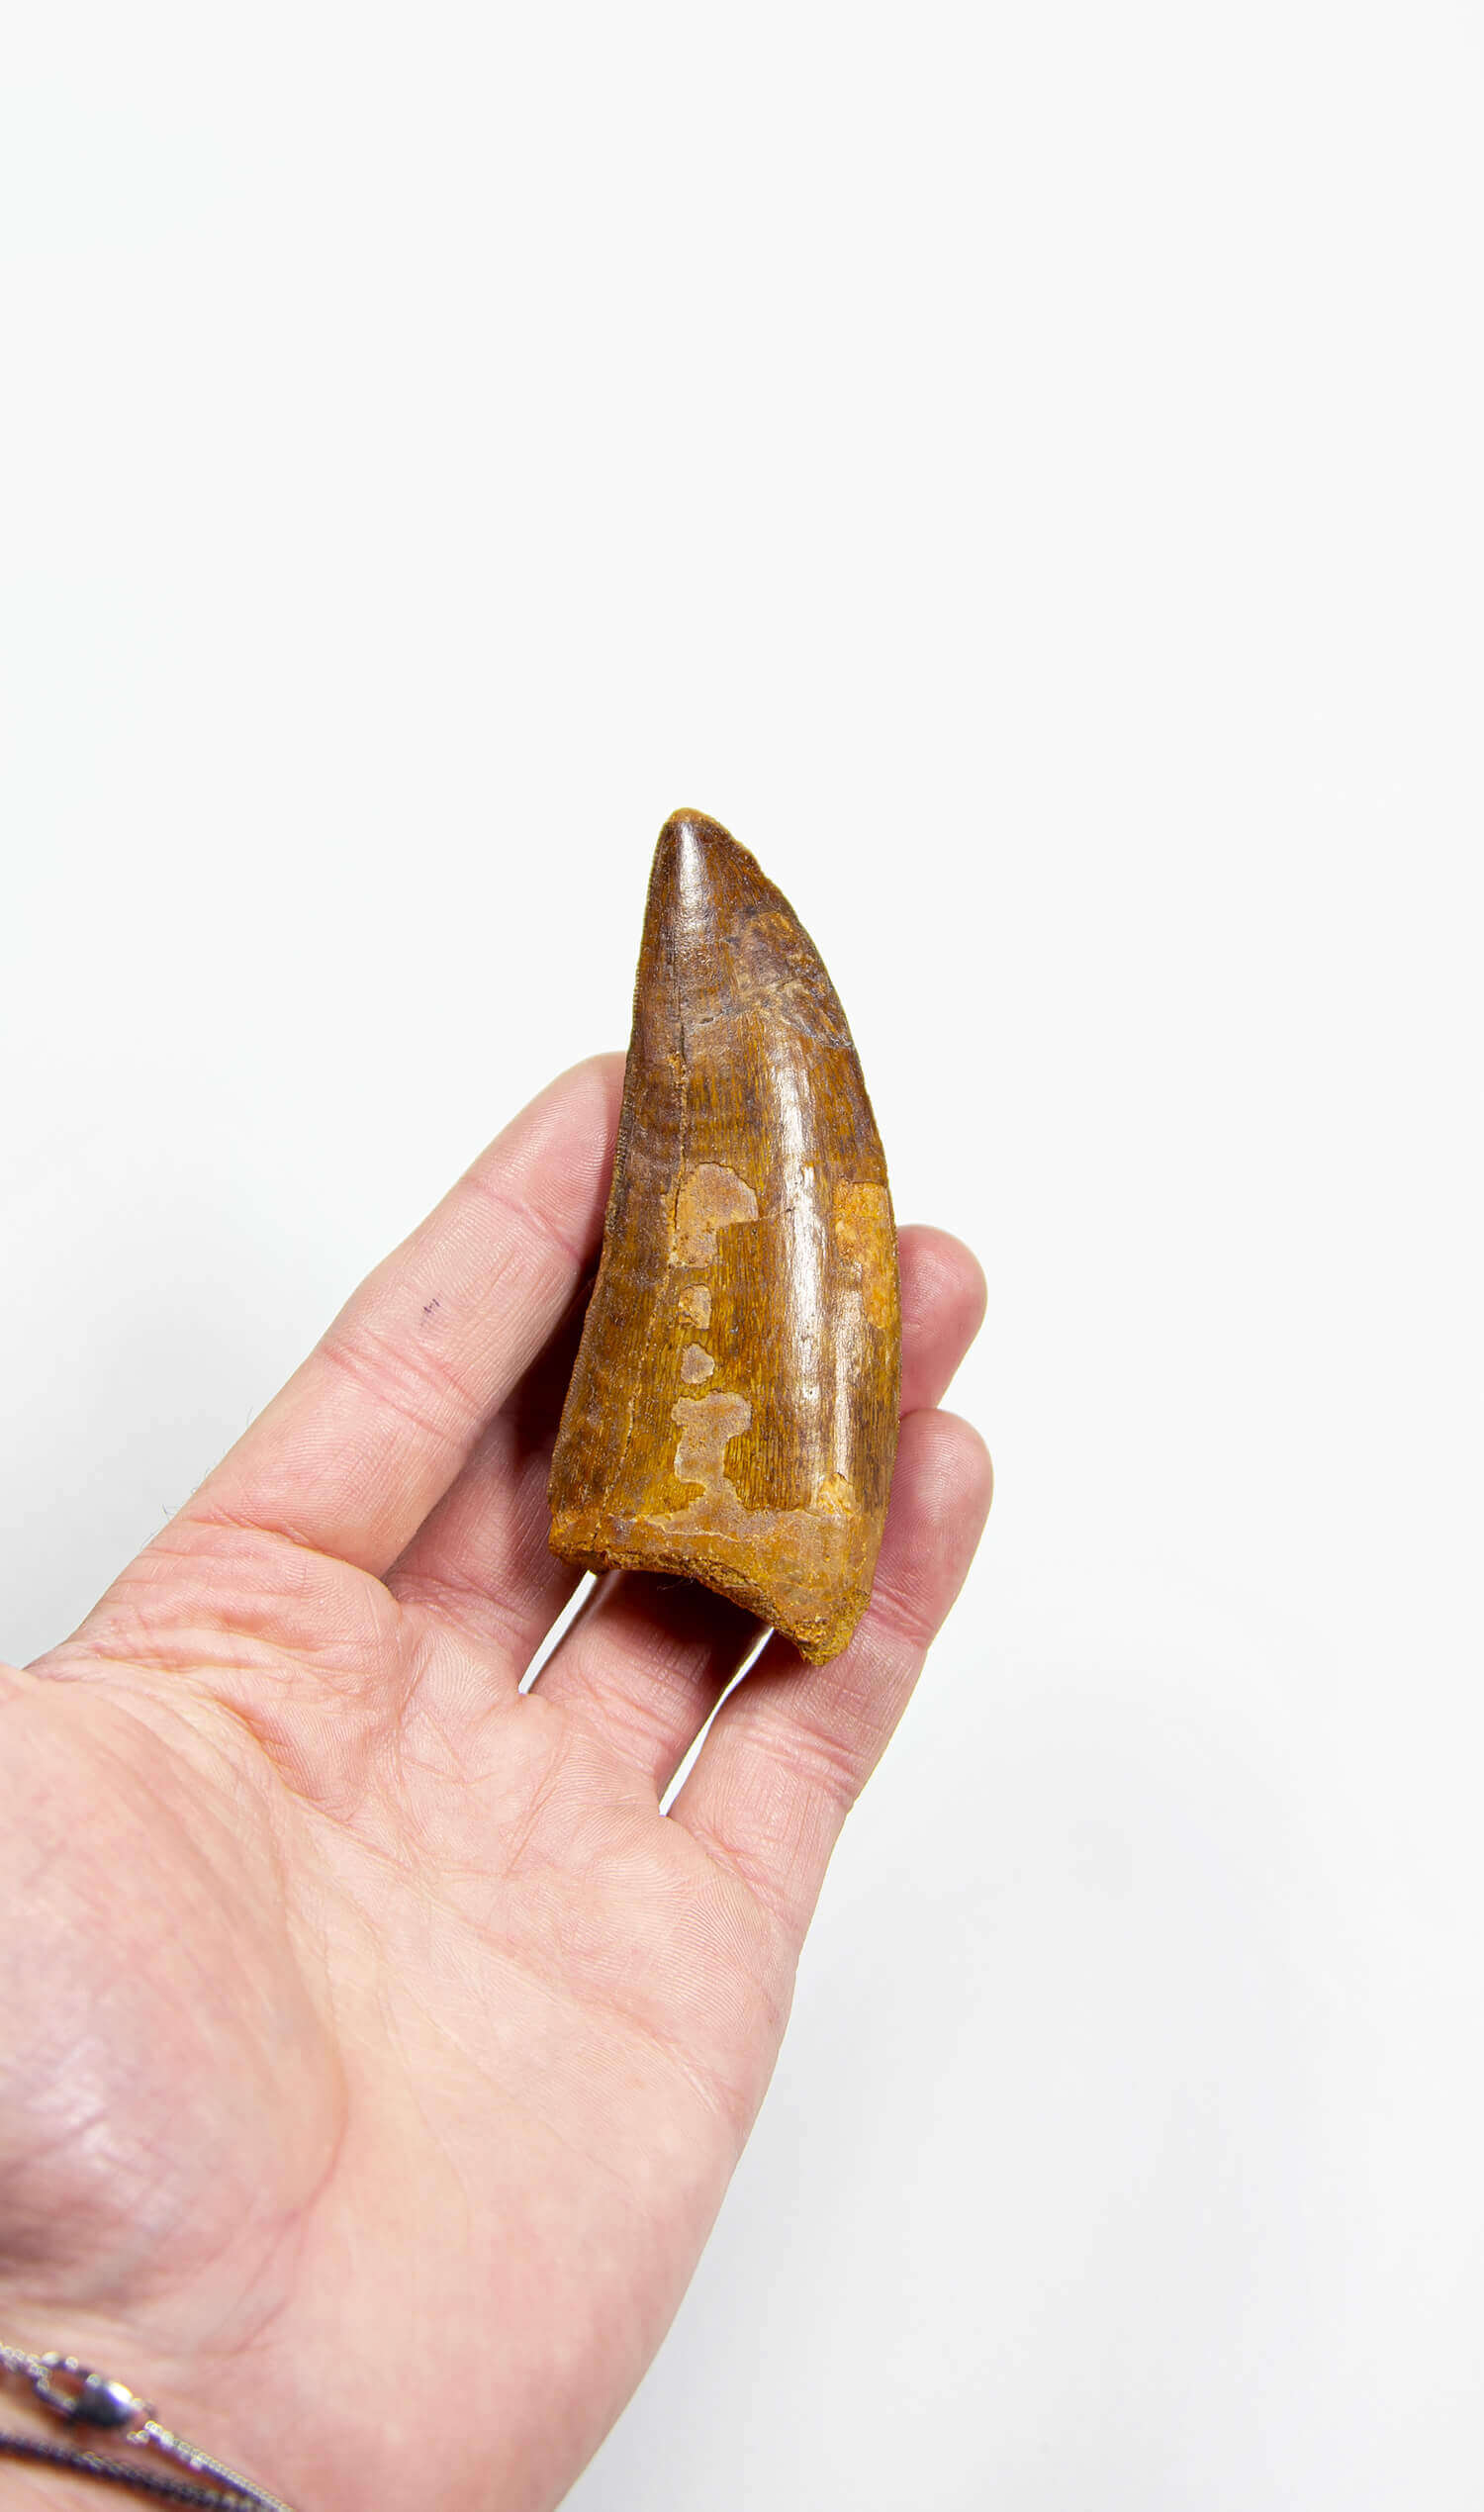 real fossil dinosaur carcharodontosaurus tooth for sale at the uk fossil store 54